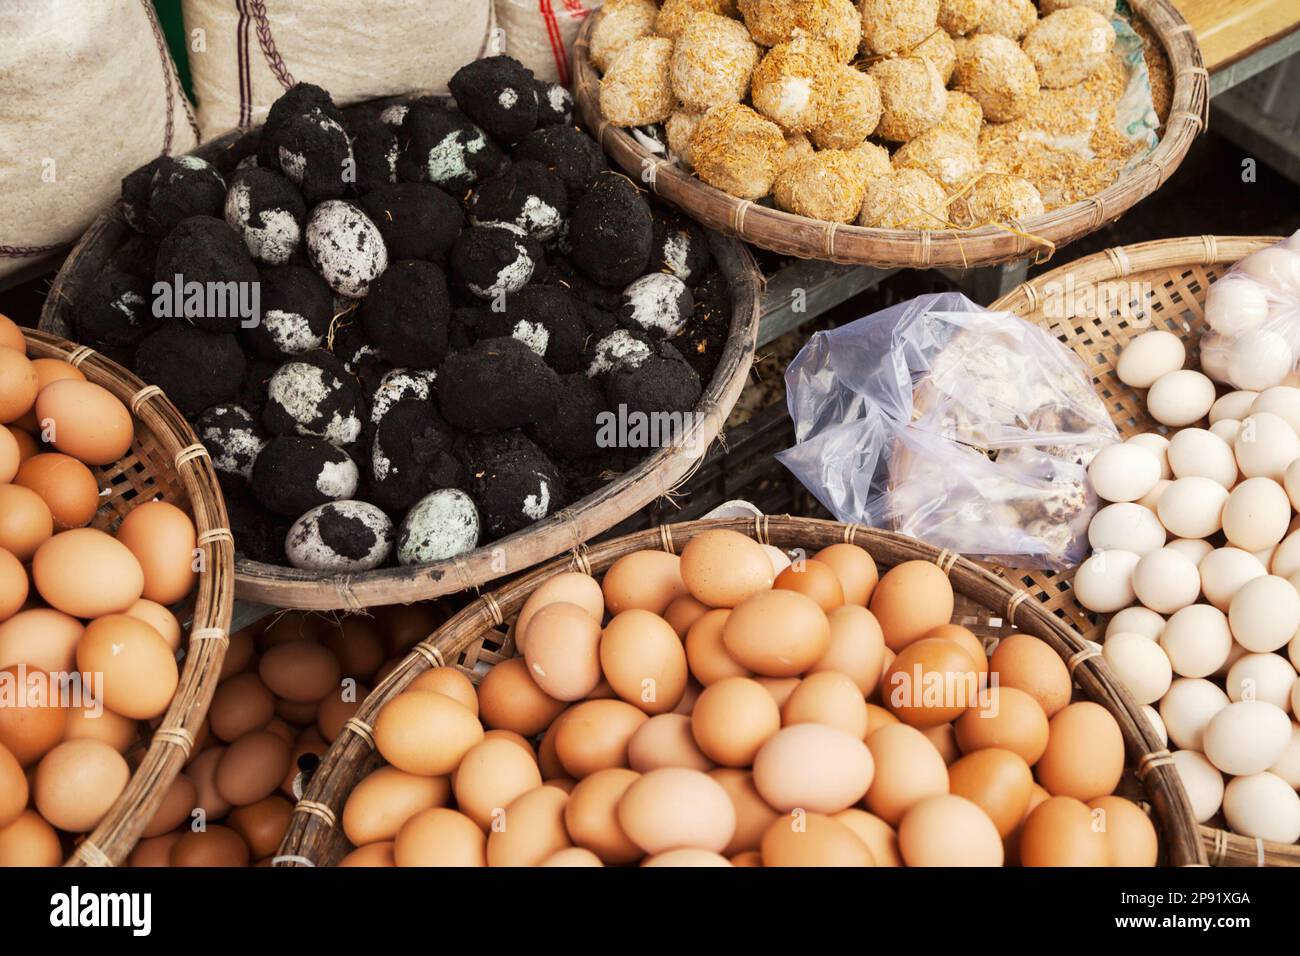 Several baskets of raw and cooked eggs at Vietnamese market. Pile of Asian delicacy black century eggs in ash Stock Photo